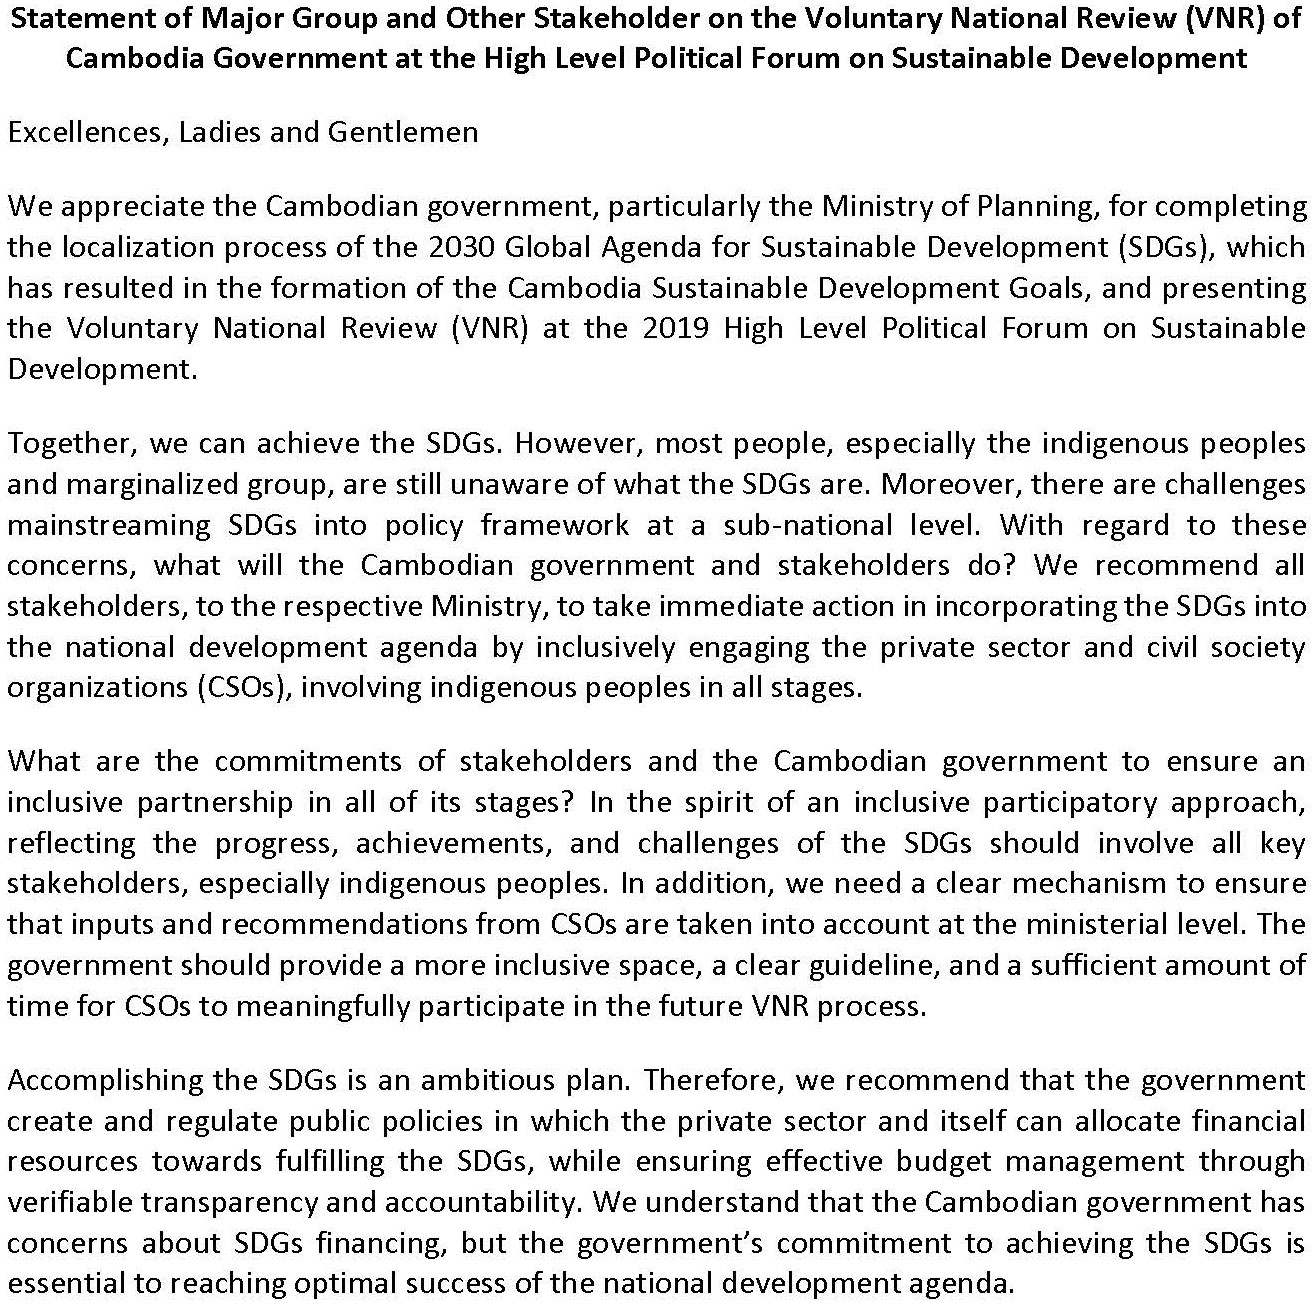 Final-Statement-Cambodia-Government-on-VNR_1